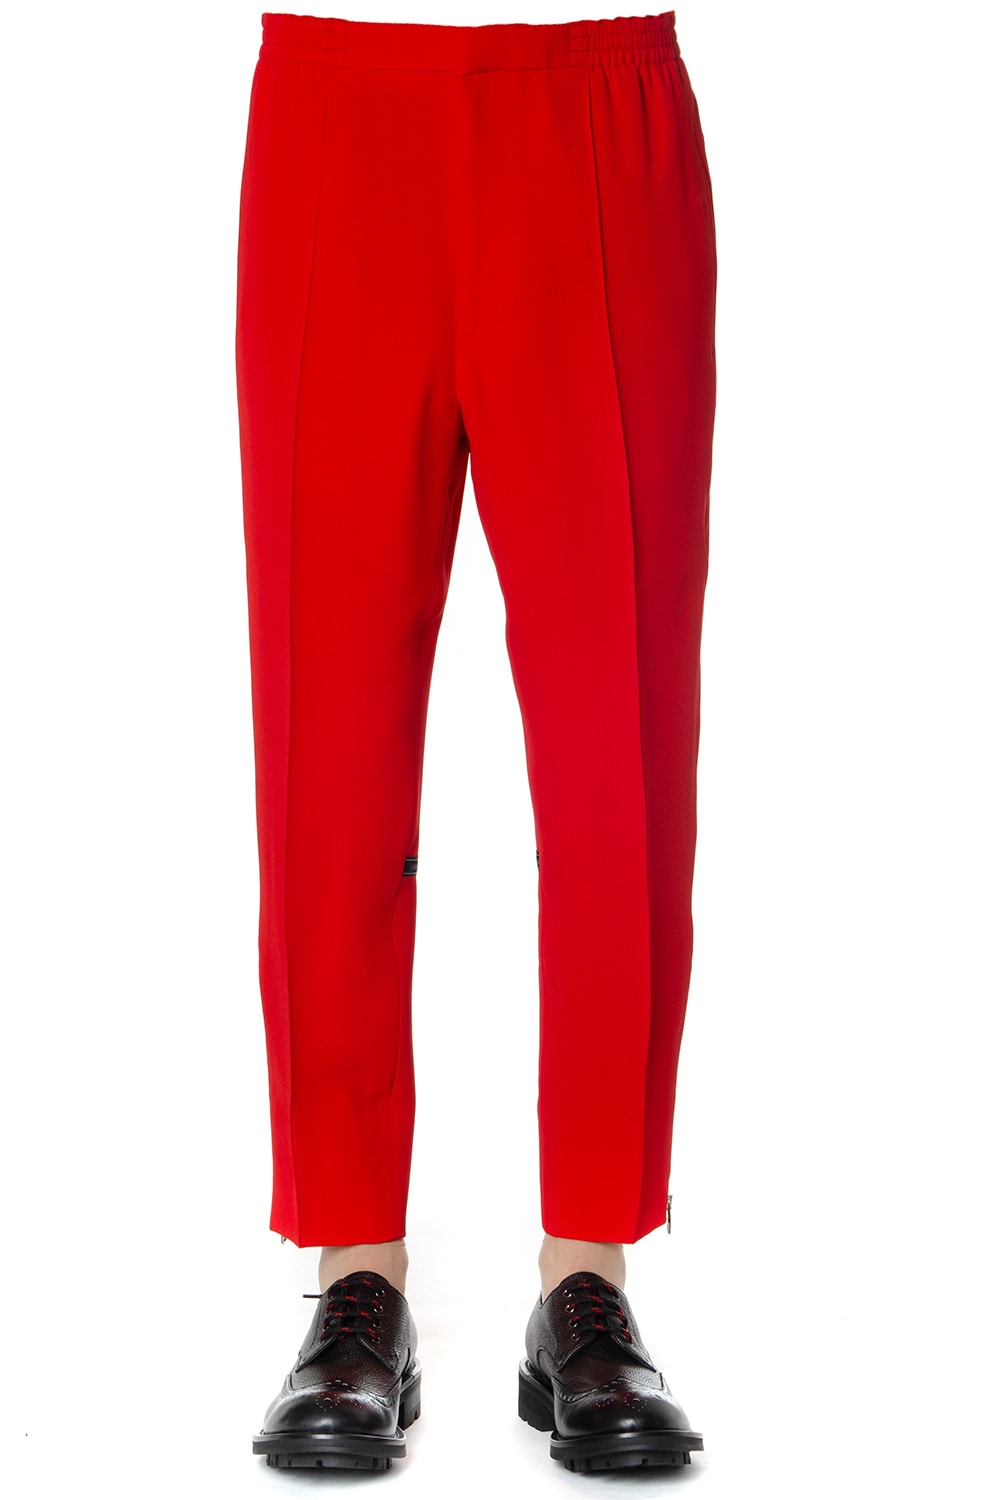 ALEXANDER MCQUEEN RED COTTON CROPPED TAILORED PANTS,11289171